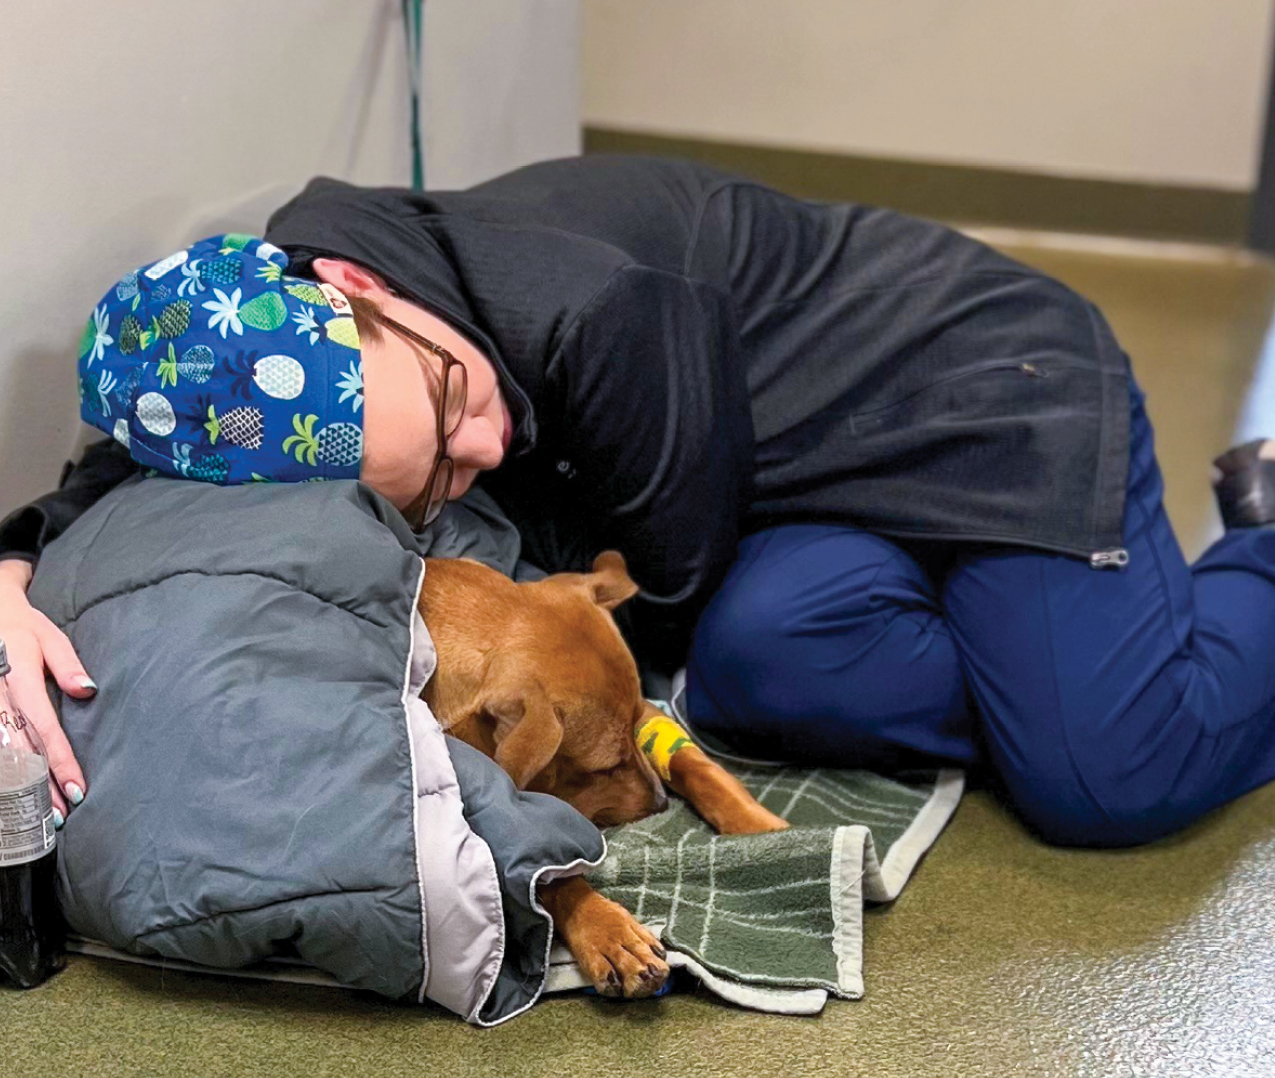 Jennifer Popejoy, CVT, comforts a patient who is recovering from surgery